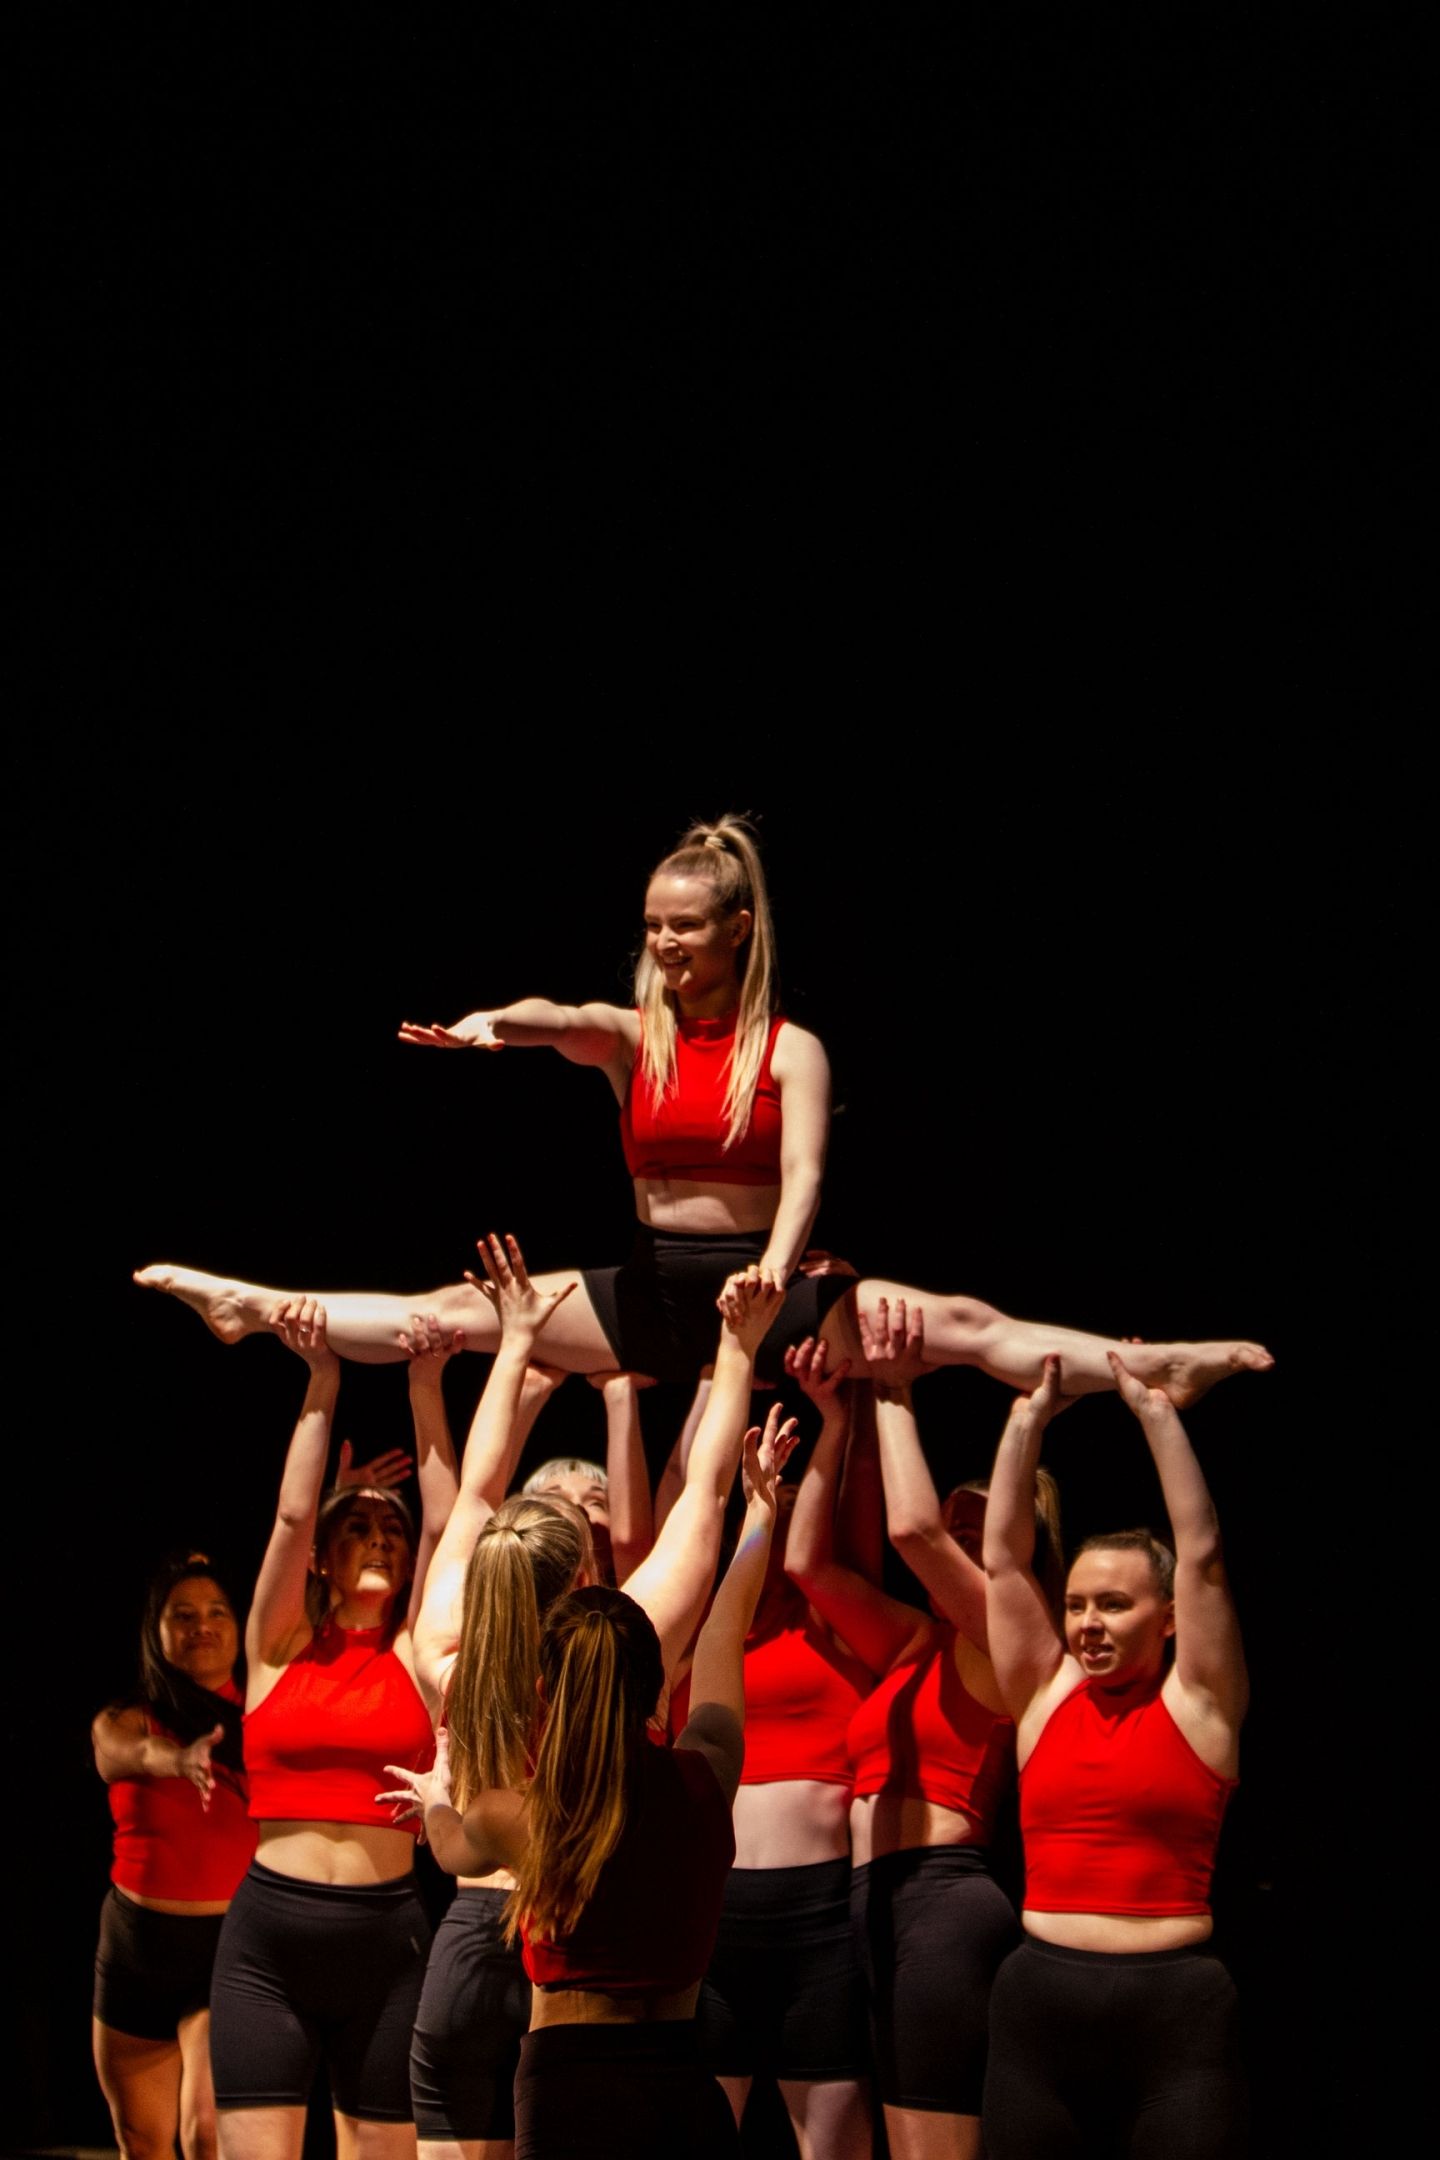 Group of Dance students lifting